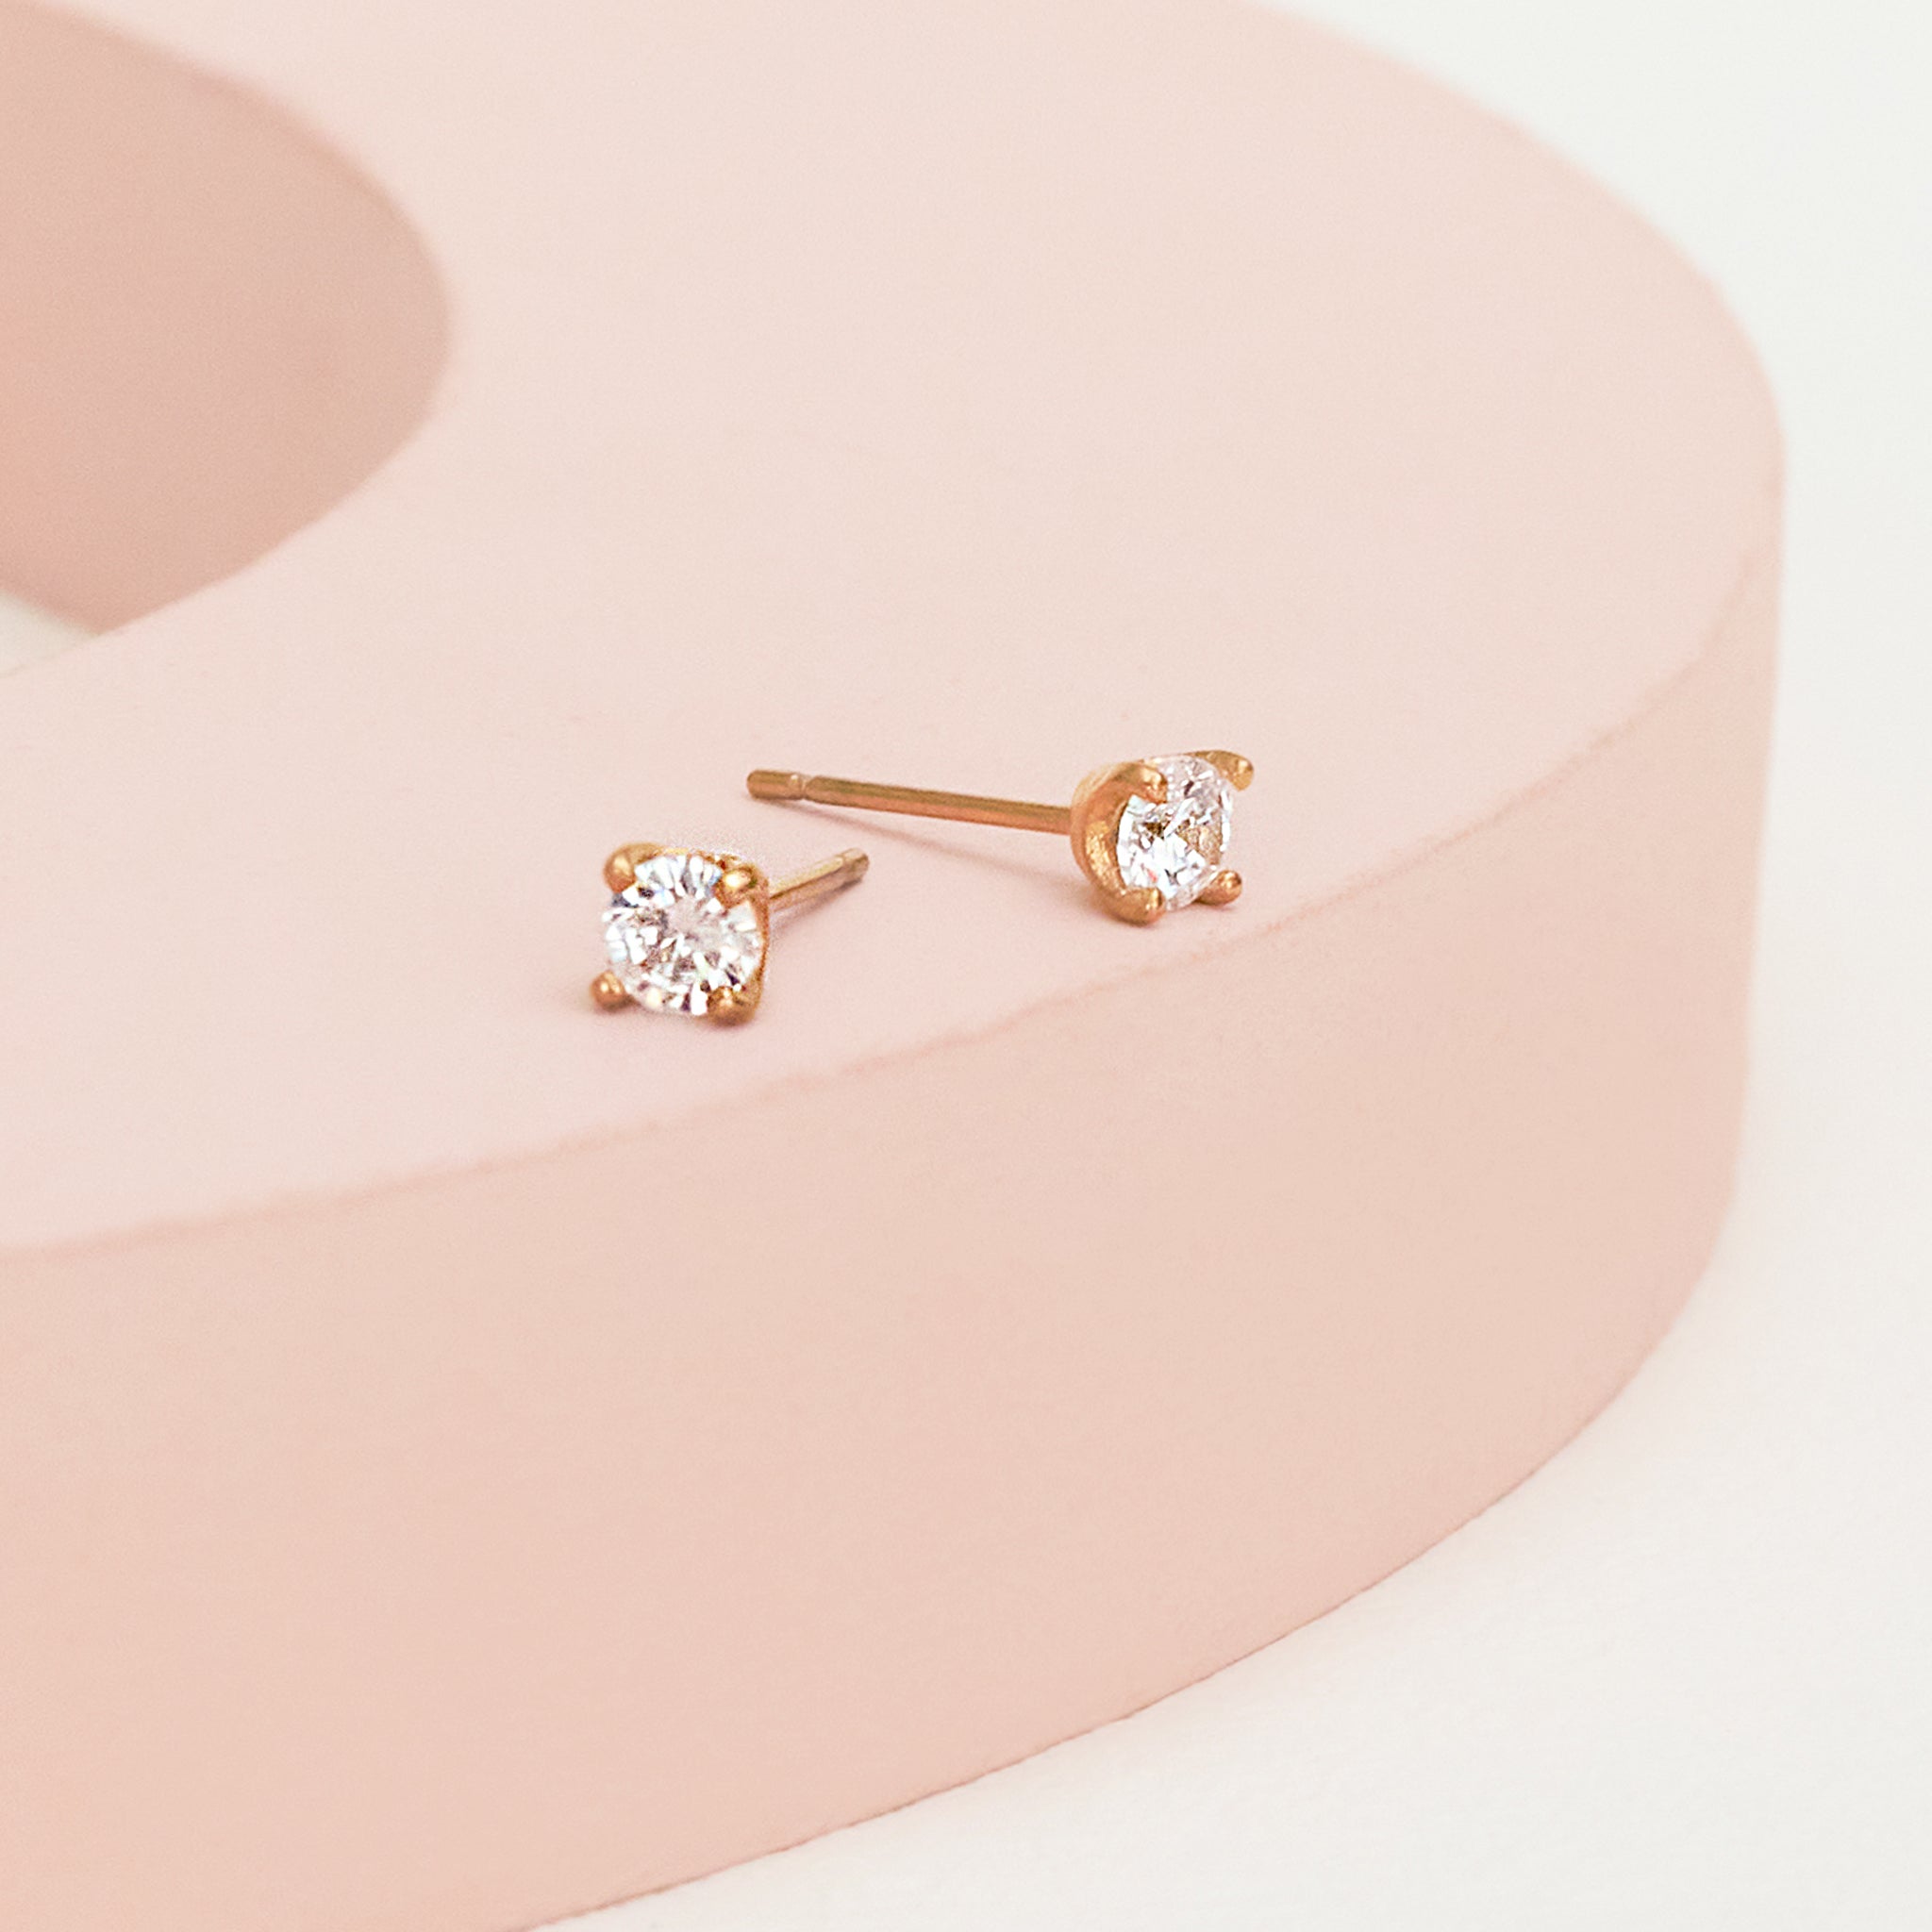 Sparkling stud earrings, front view